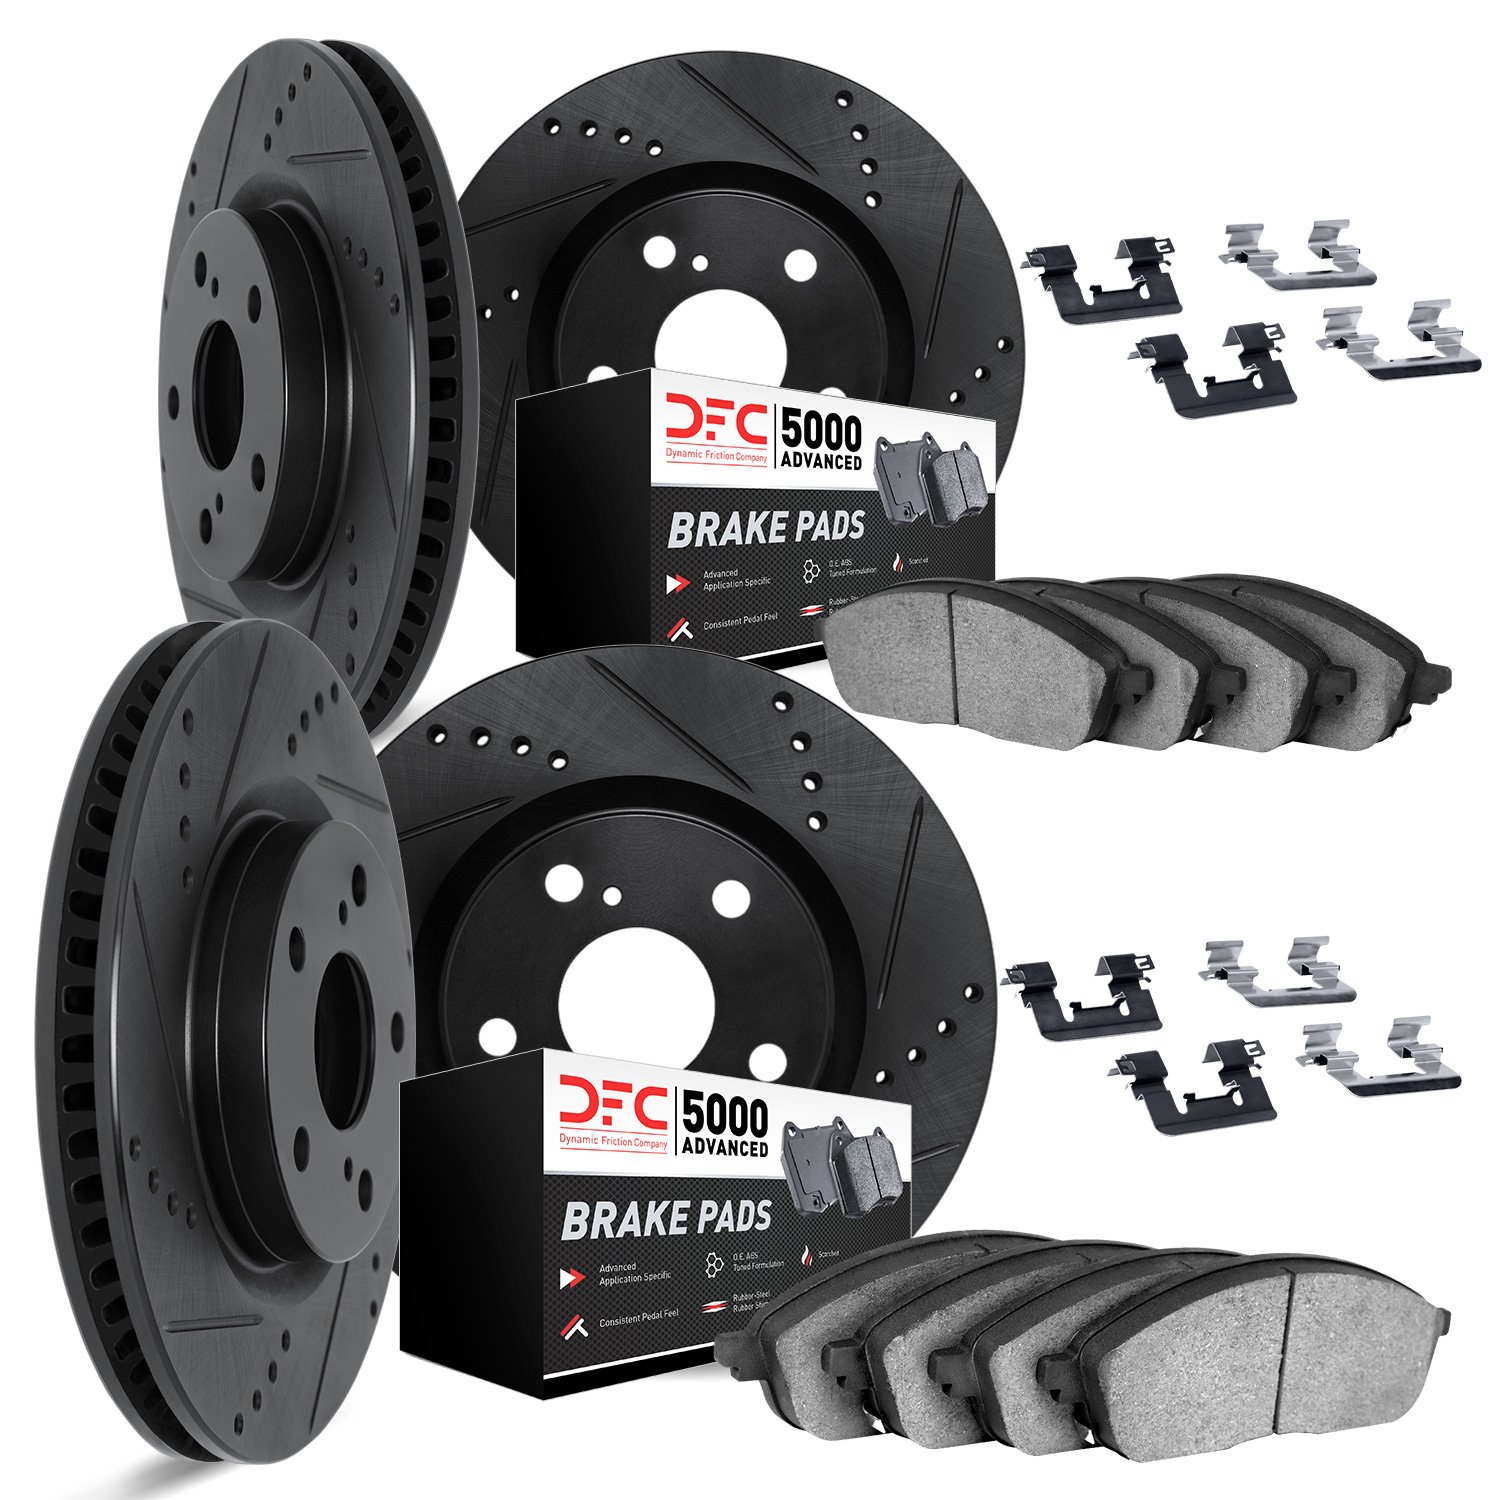 8514-31033 Drilled/Slotted Brake Rotors w/5000 Advanced Brake Pads Kit & Hardware [Black], 2016-2019 BMW, Position: Front and Re